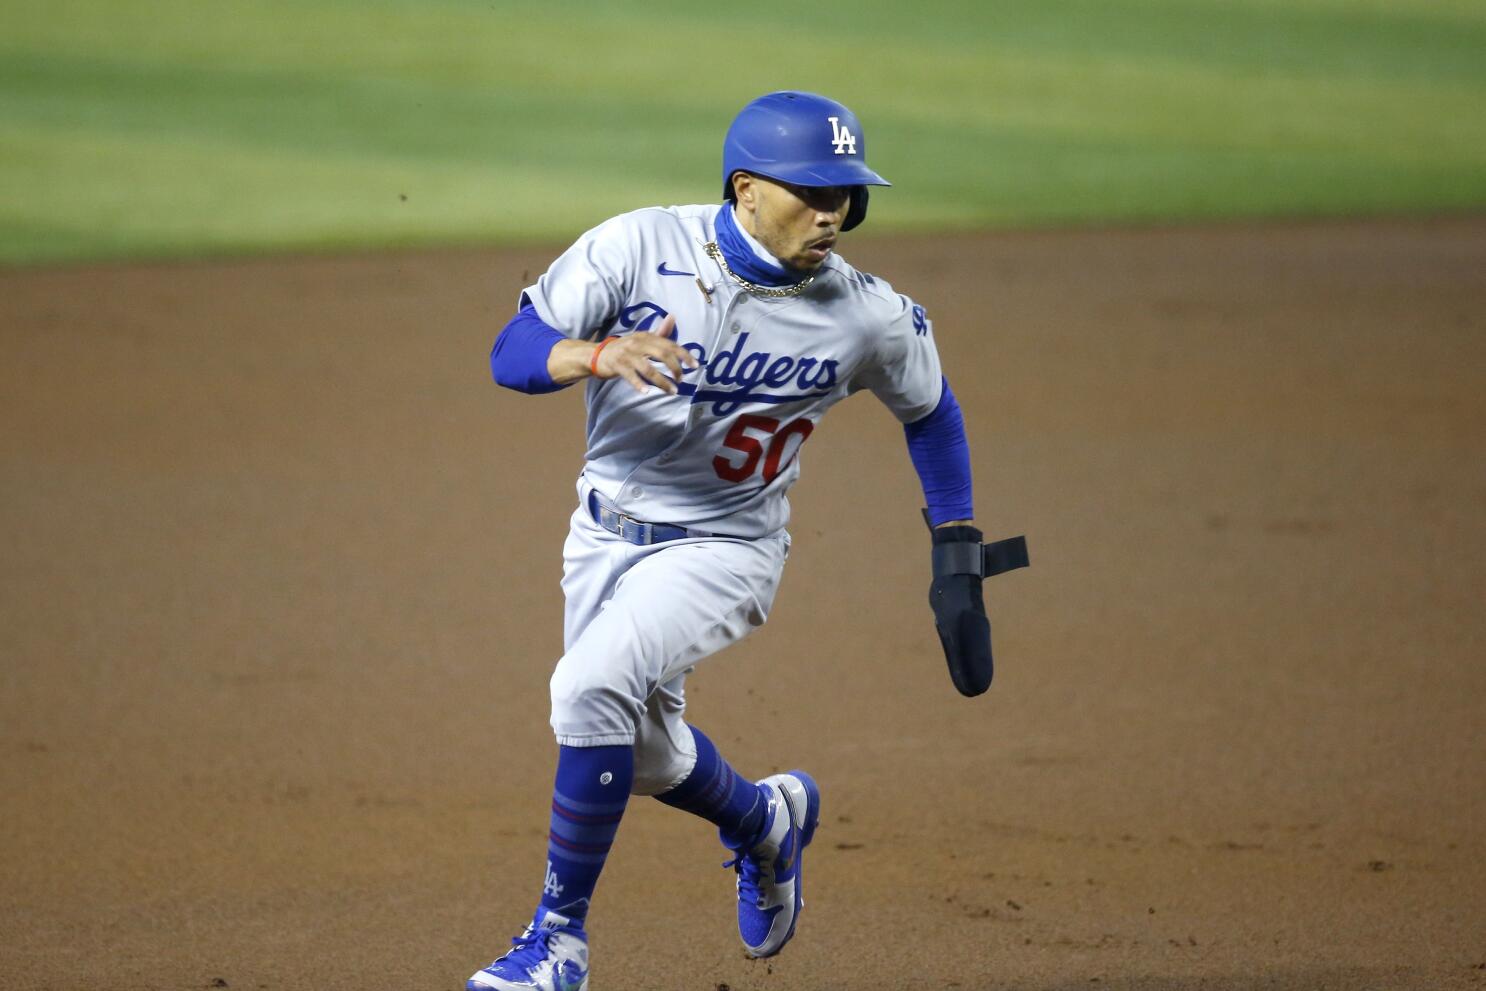 No task too small for Dodgers' Betts